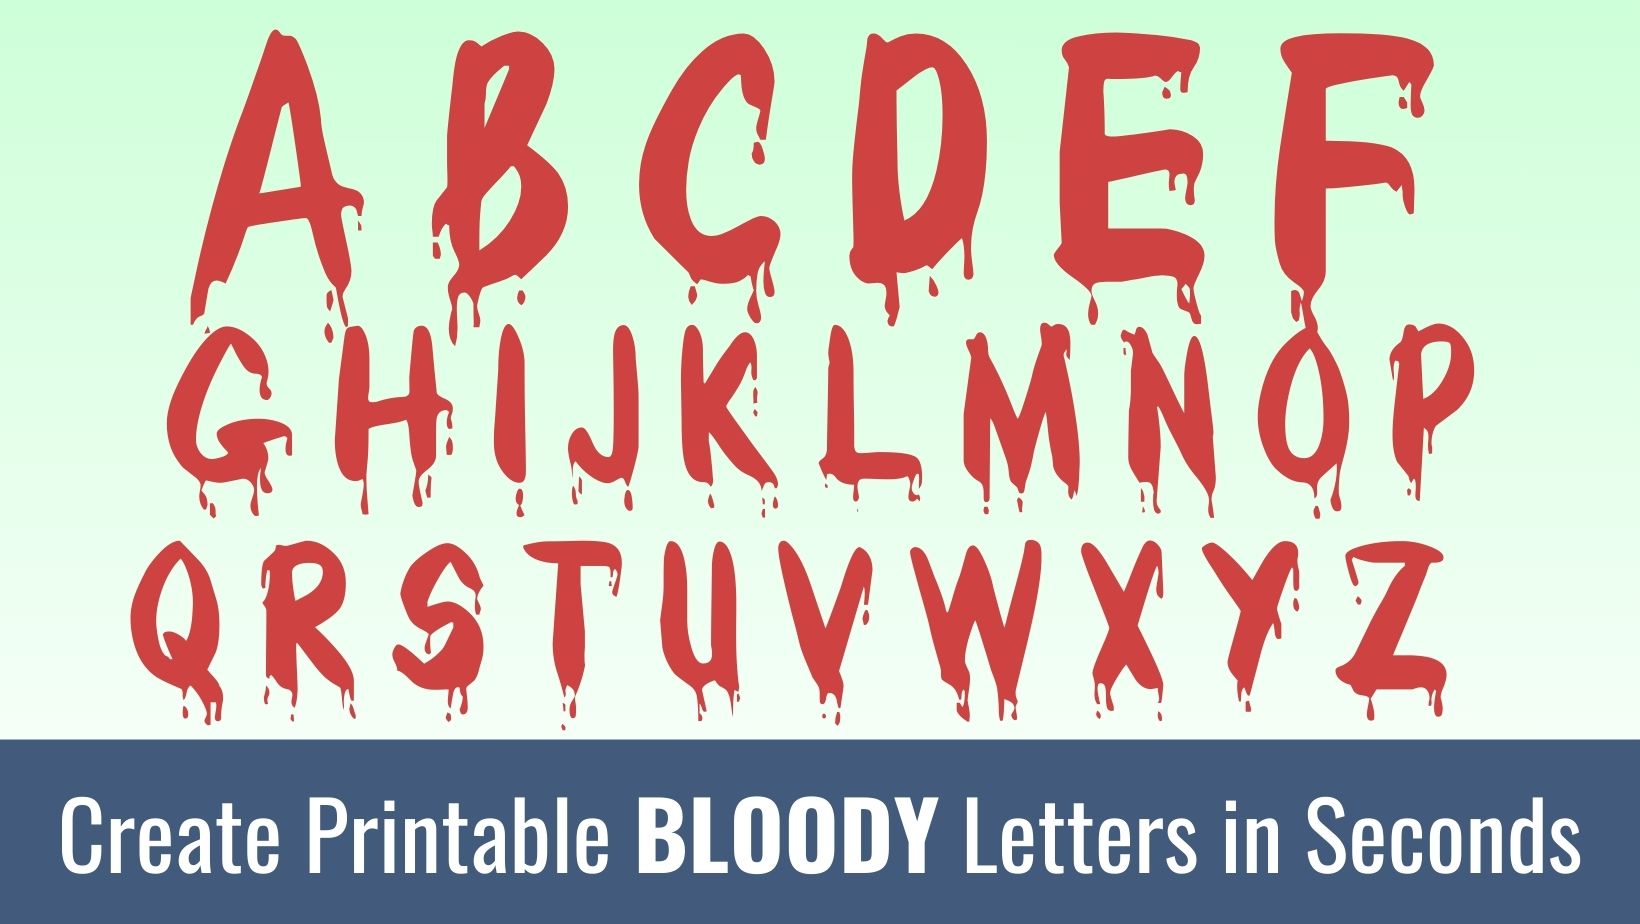 Printable bloody Letters: Free Alphabet Font and Letter Templates